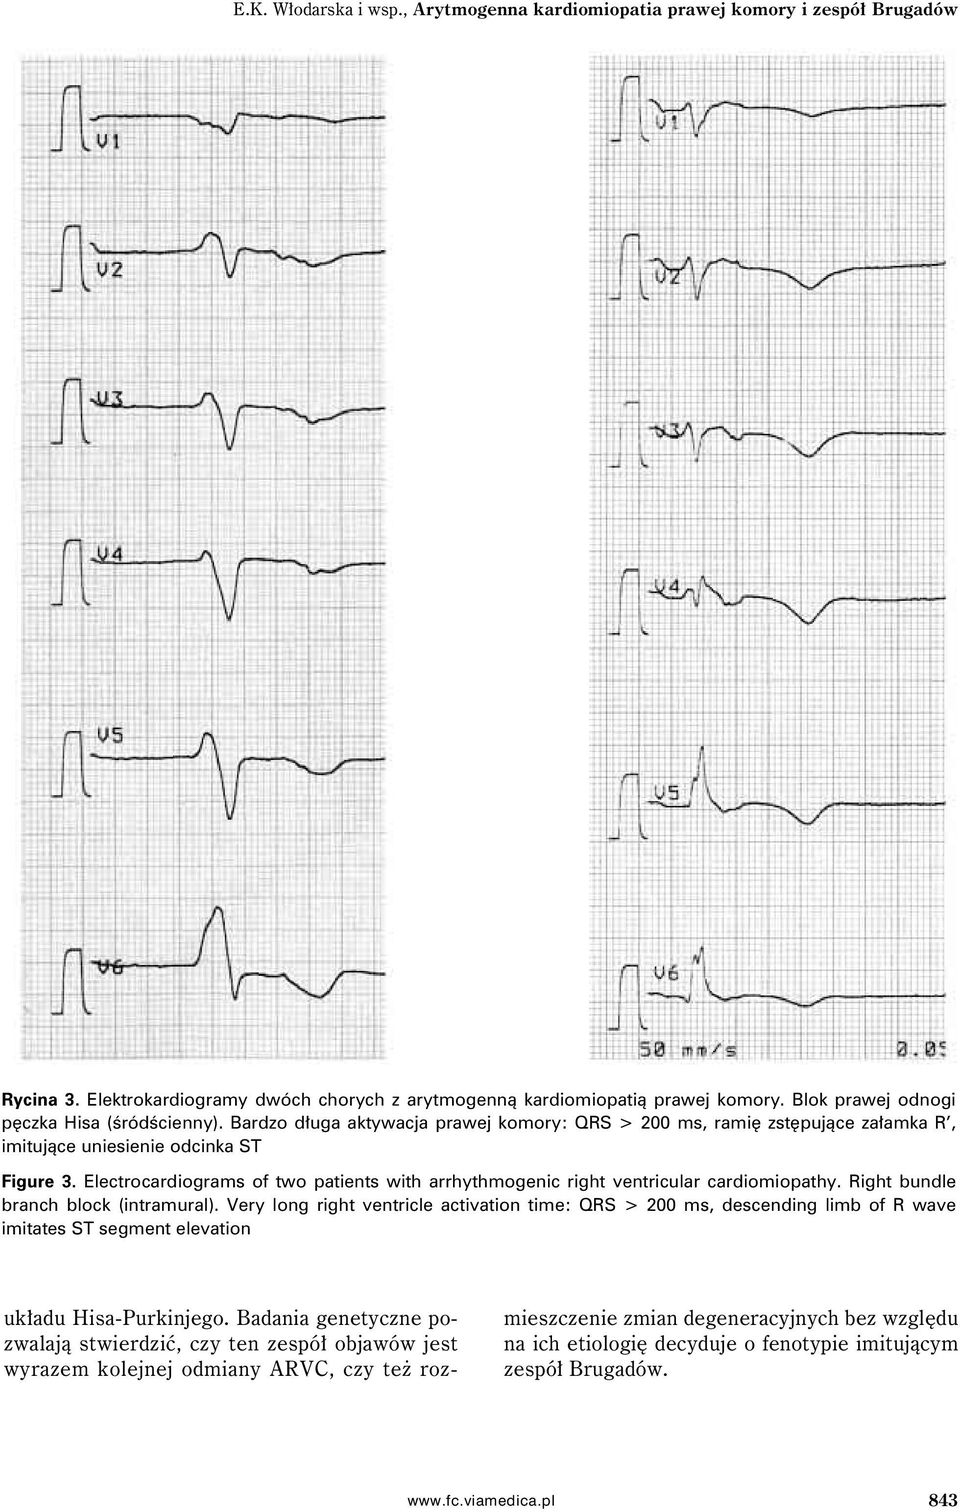 Electrocardiograms of two patients with arrhythmogenic right ventricular cardiomiopathy. Right bundle branch block (intramural).